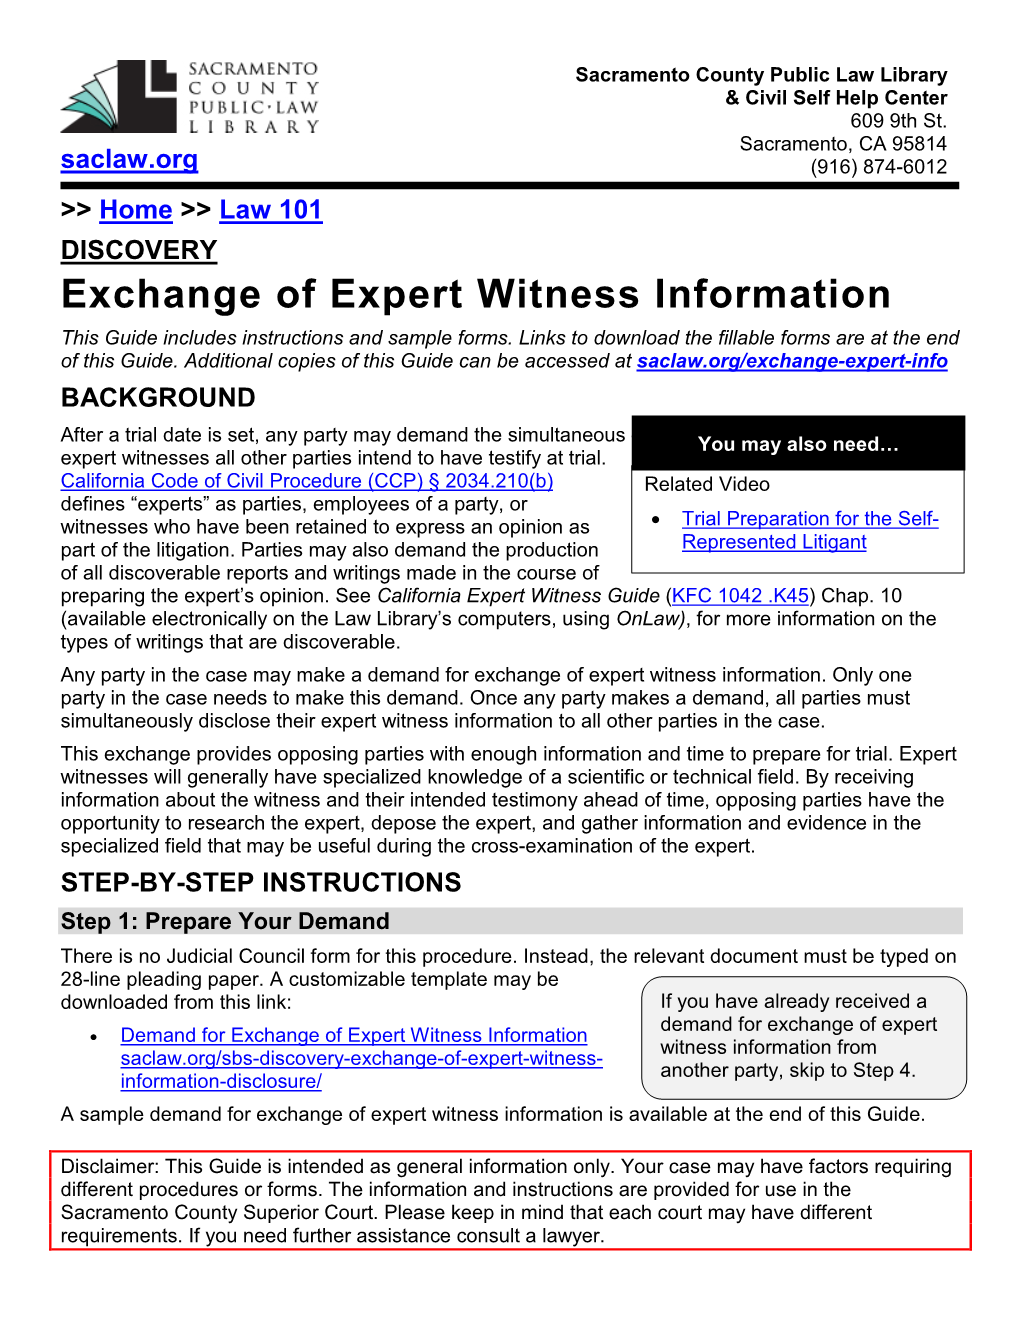 Exchange of Expert Witness Information This Guide Includes Instructions and Sample Forms